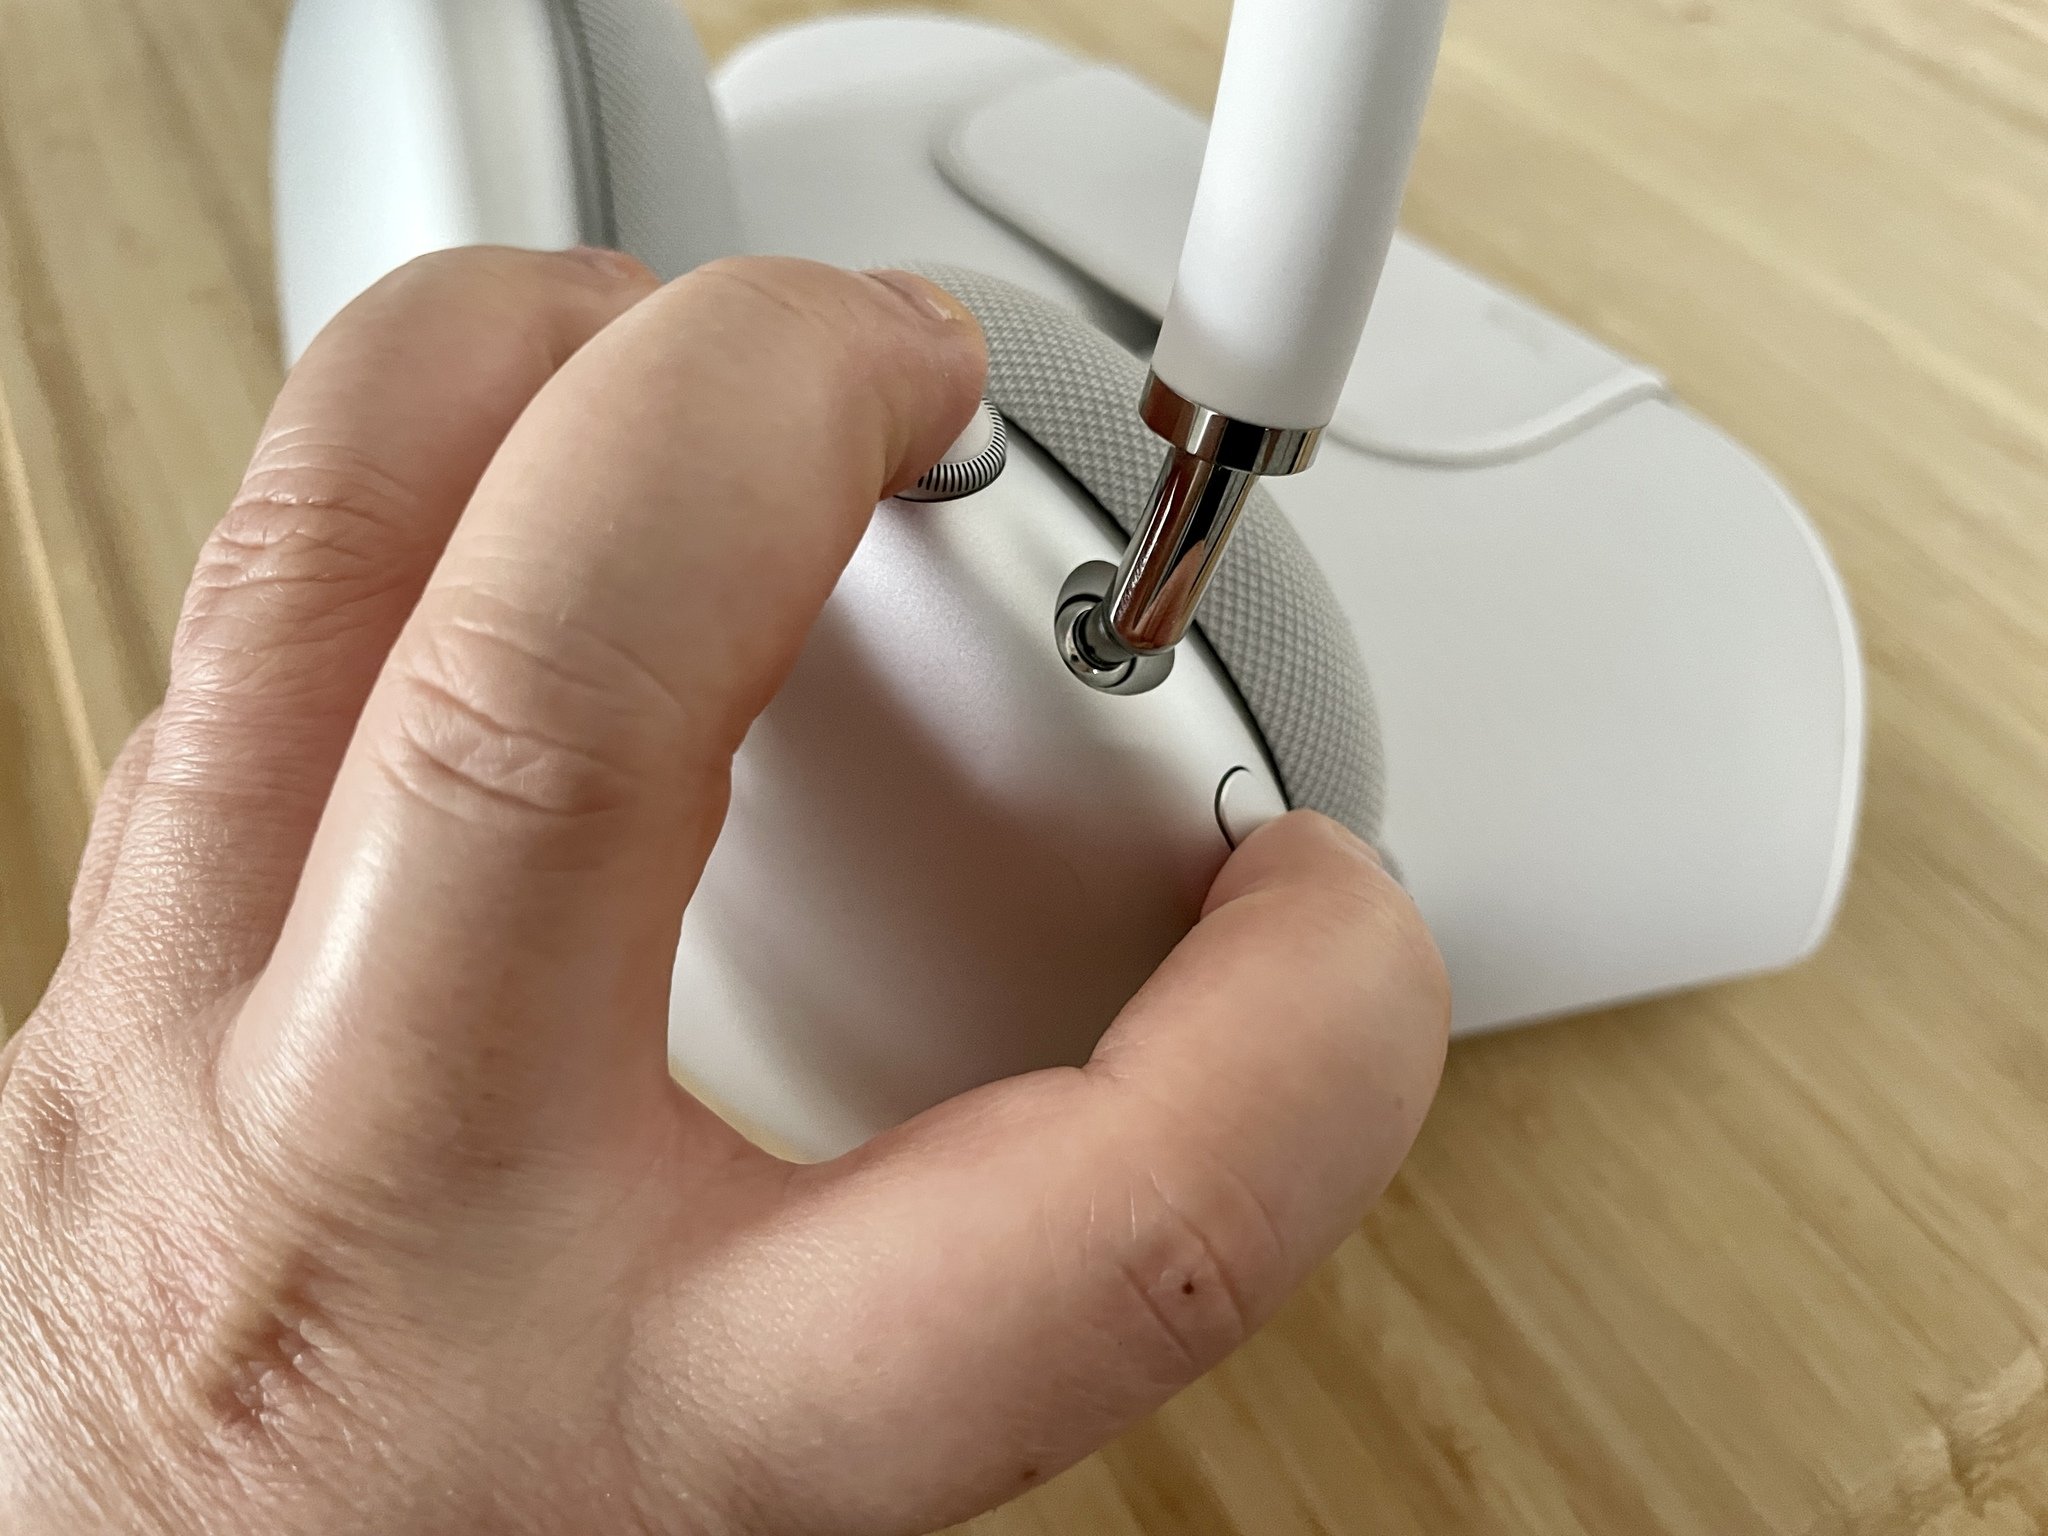 Restart AirPods Max by showing: Press the Digital Crown and Noise Control buttons at the same time for 12 seconds until the status light is flashing amber